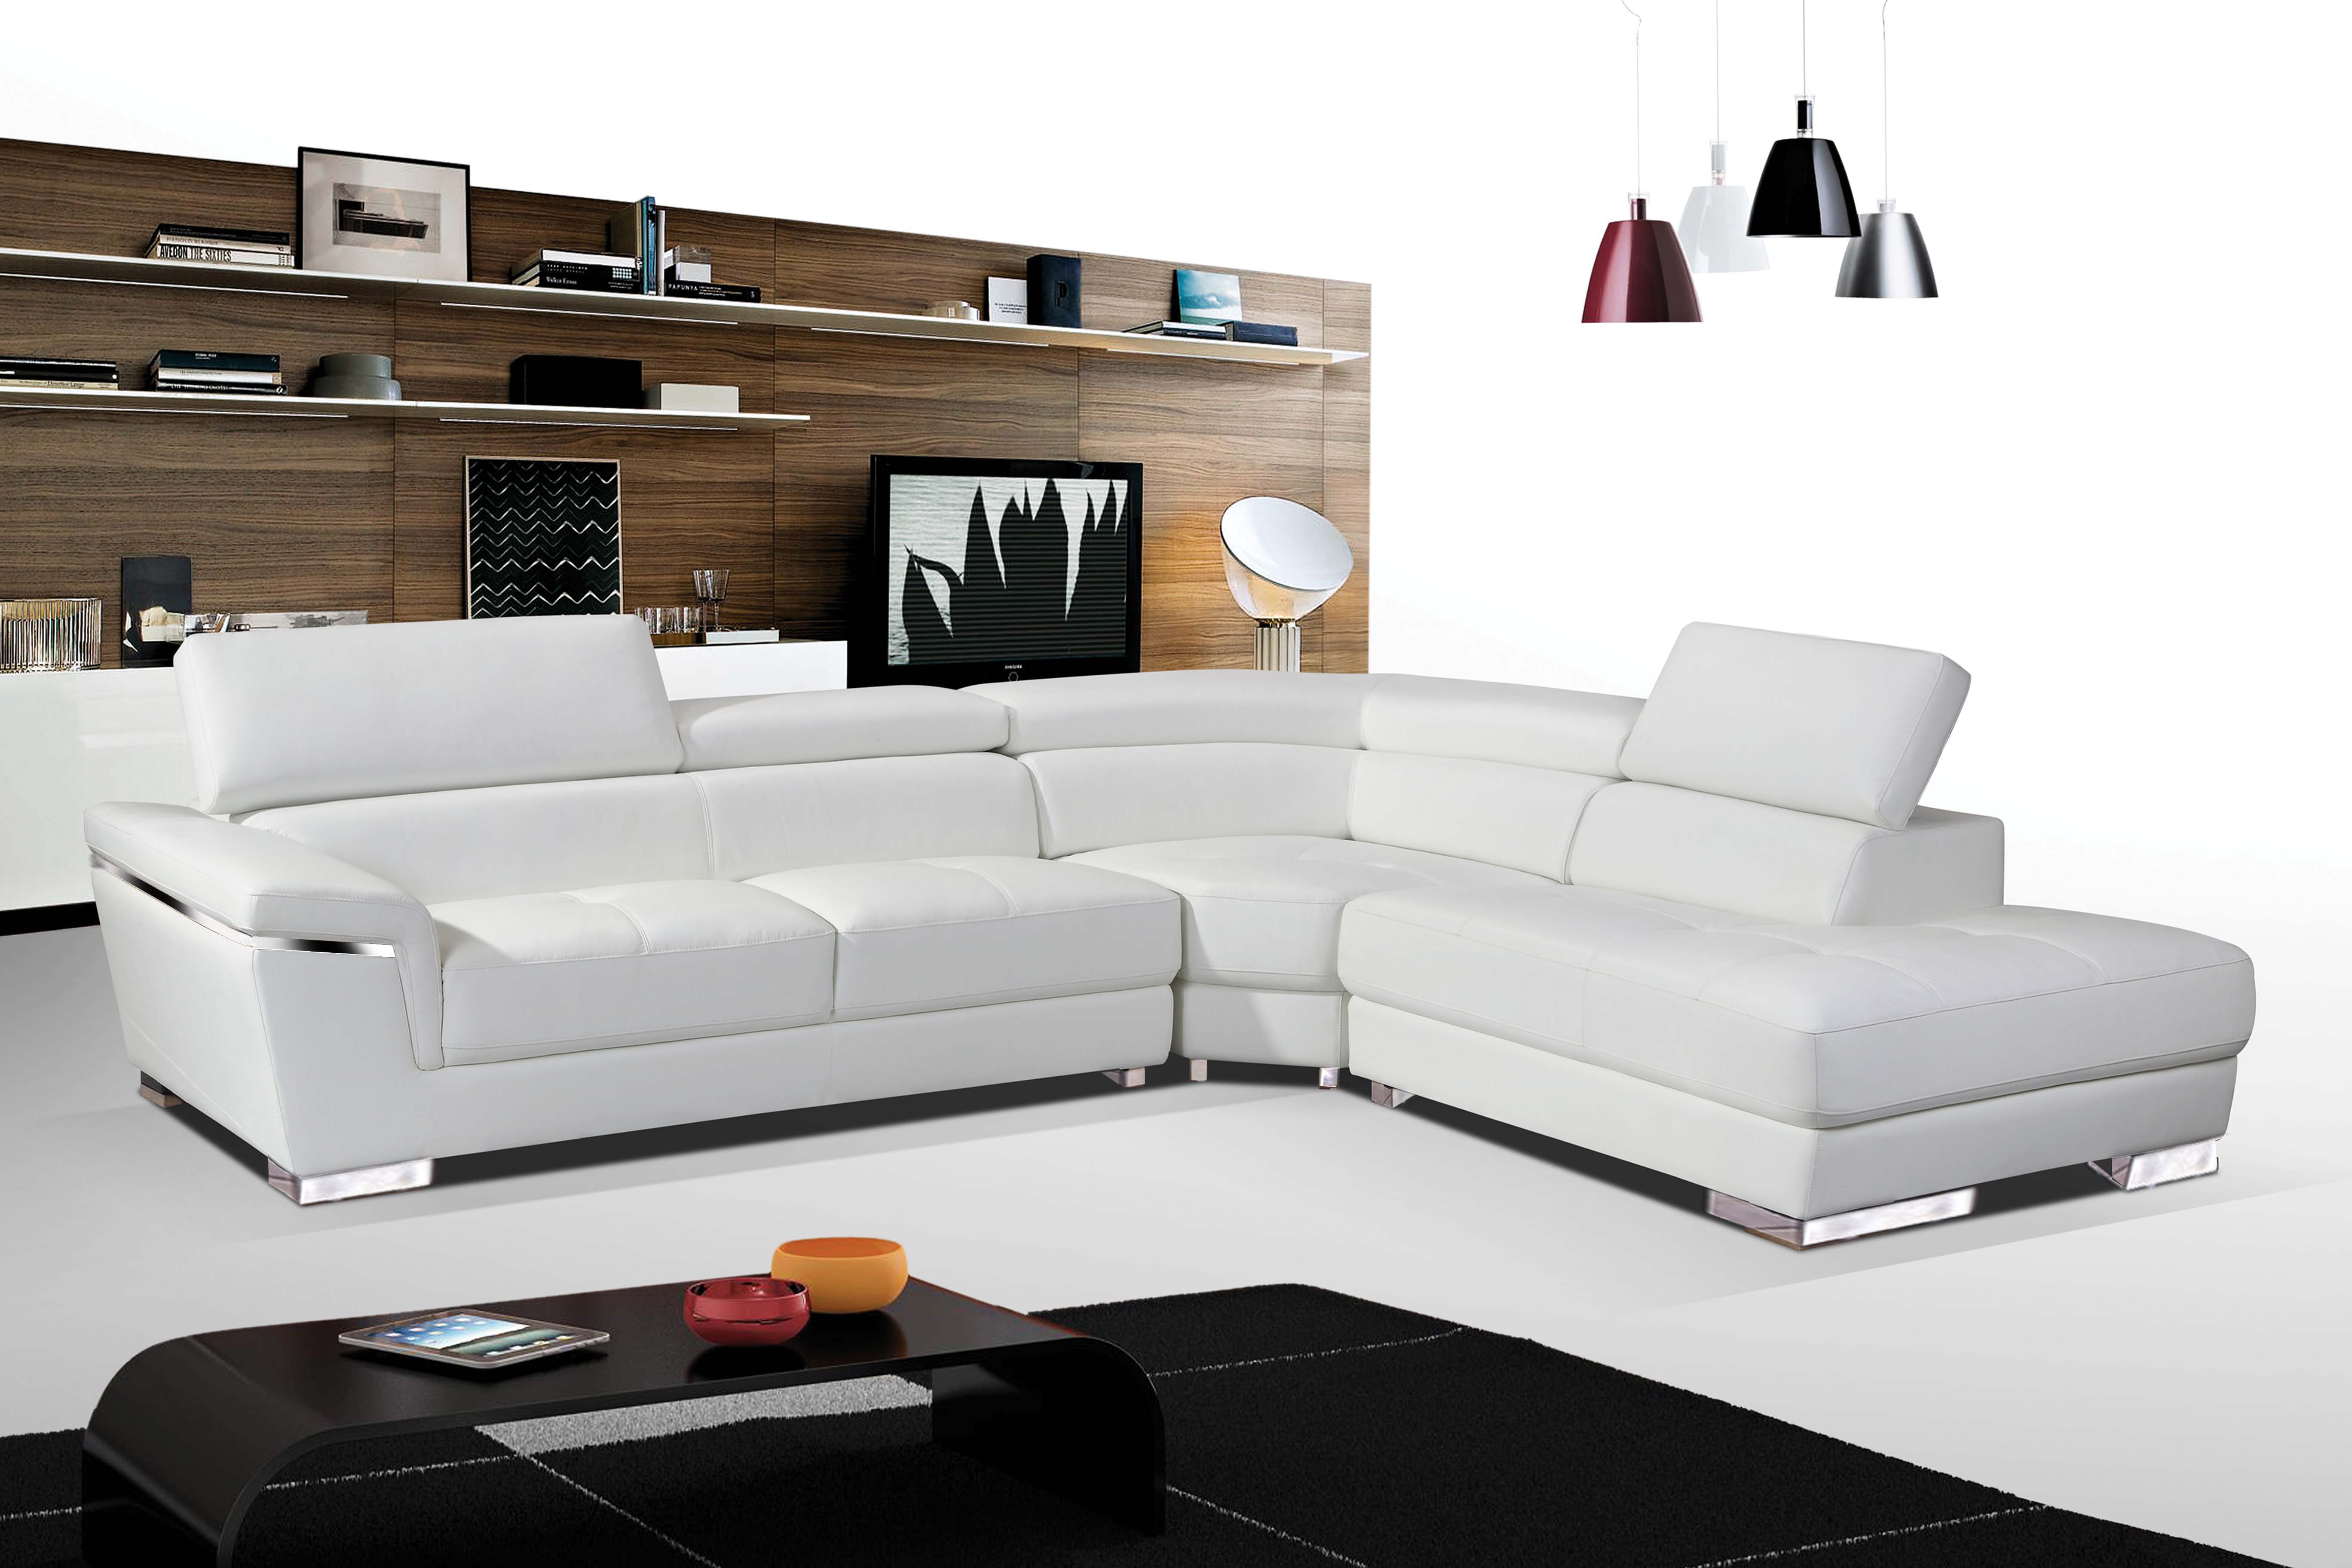 Living Room Furniture Sleepers Sofas Loveseats and Chairs 2383 Sectional